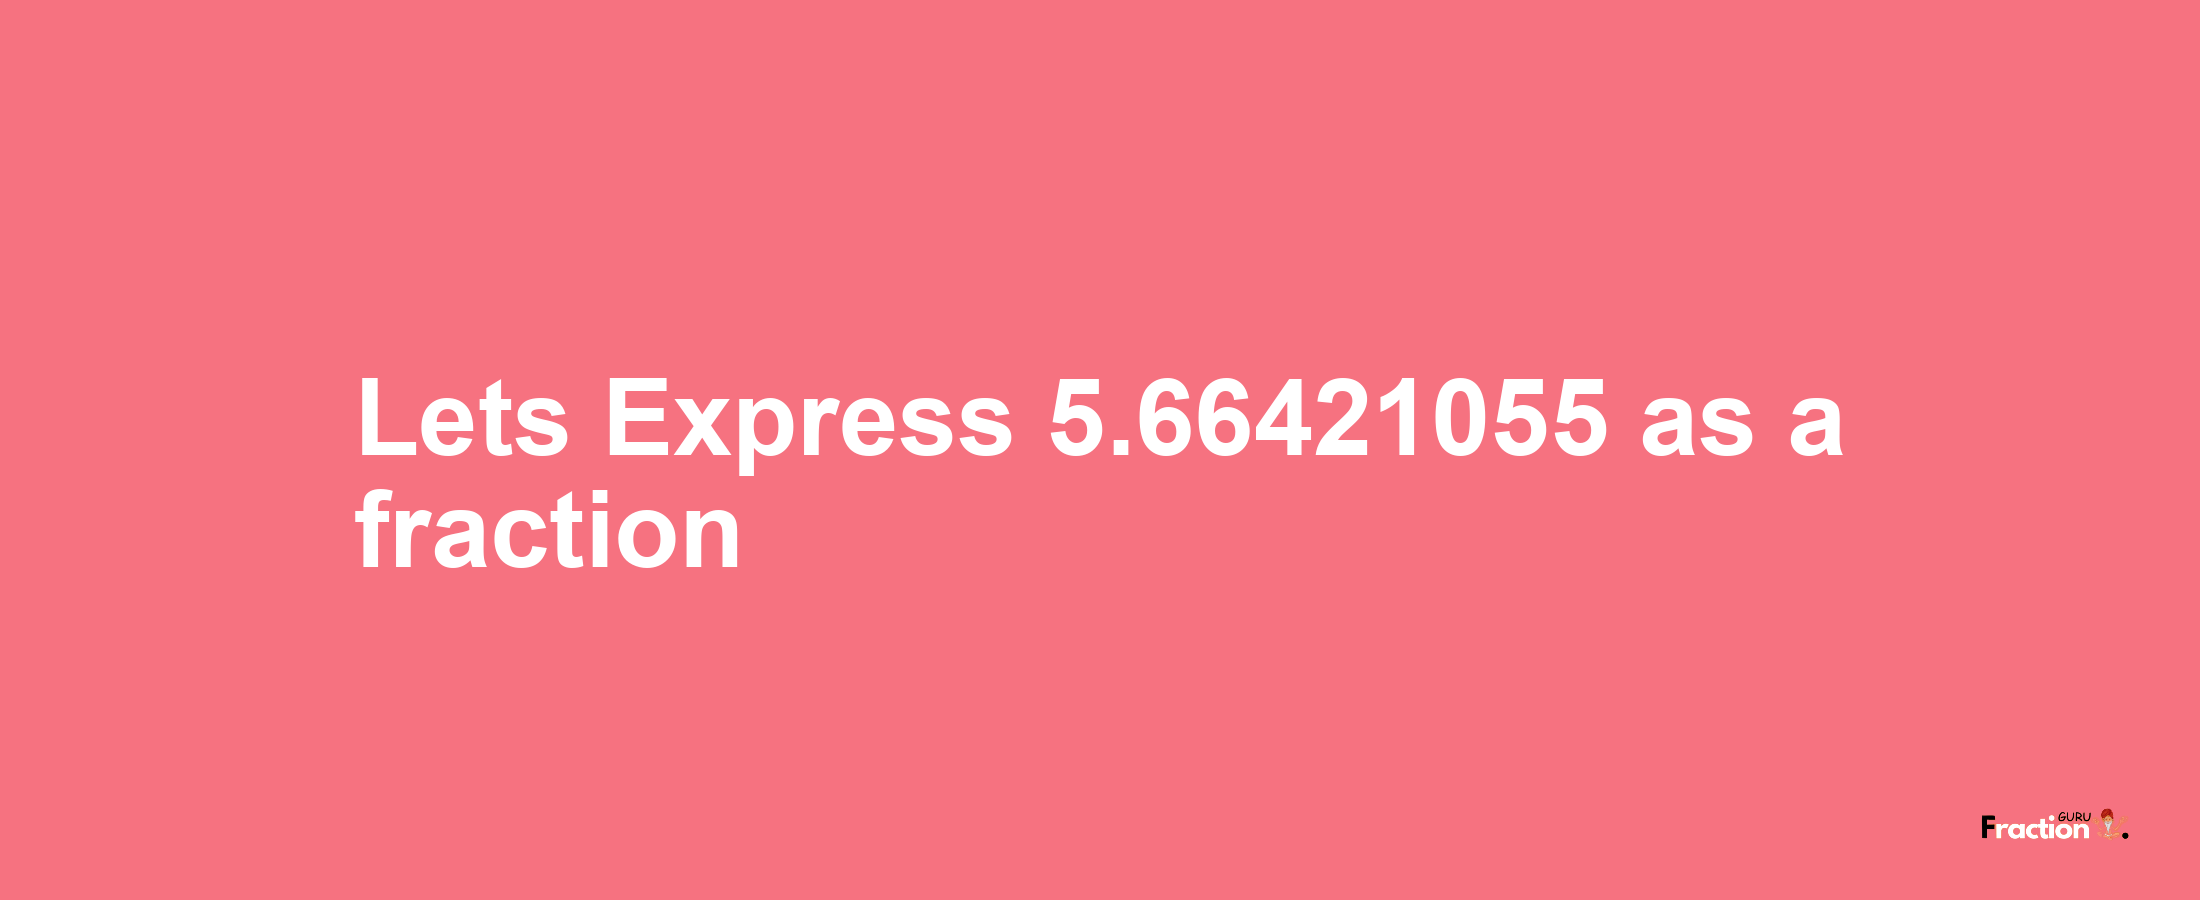 Lets Express 5.66421055 as afraction